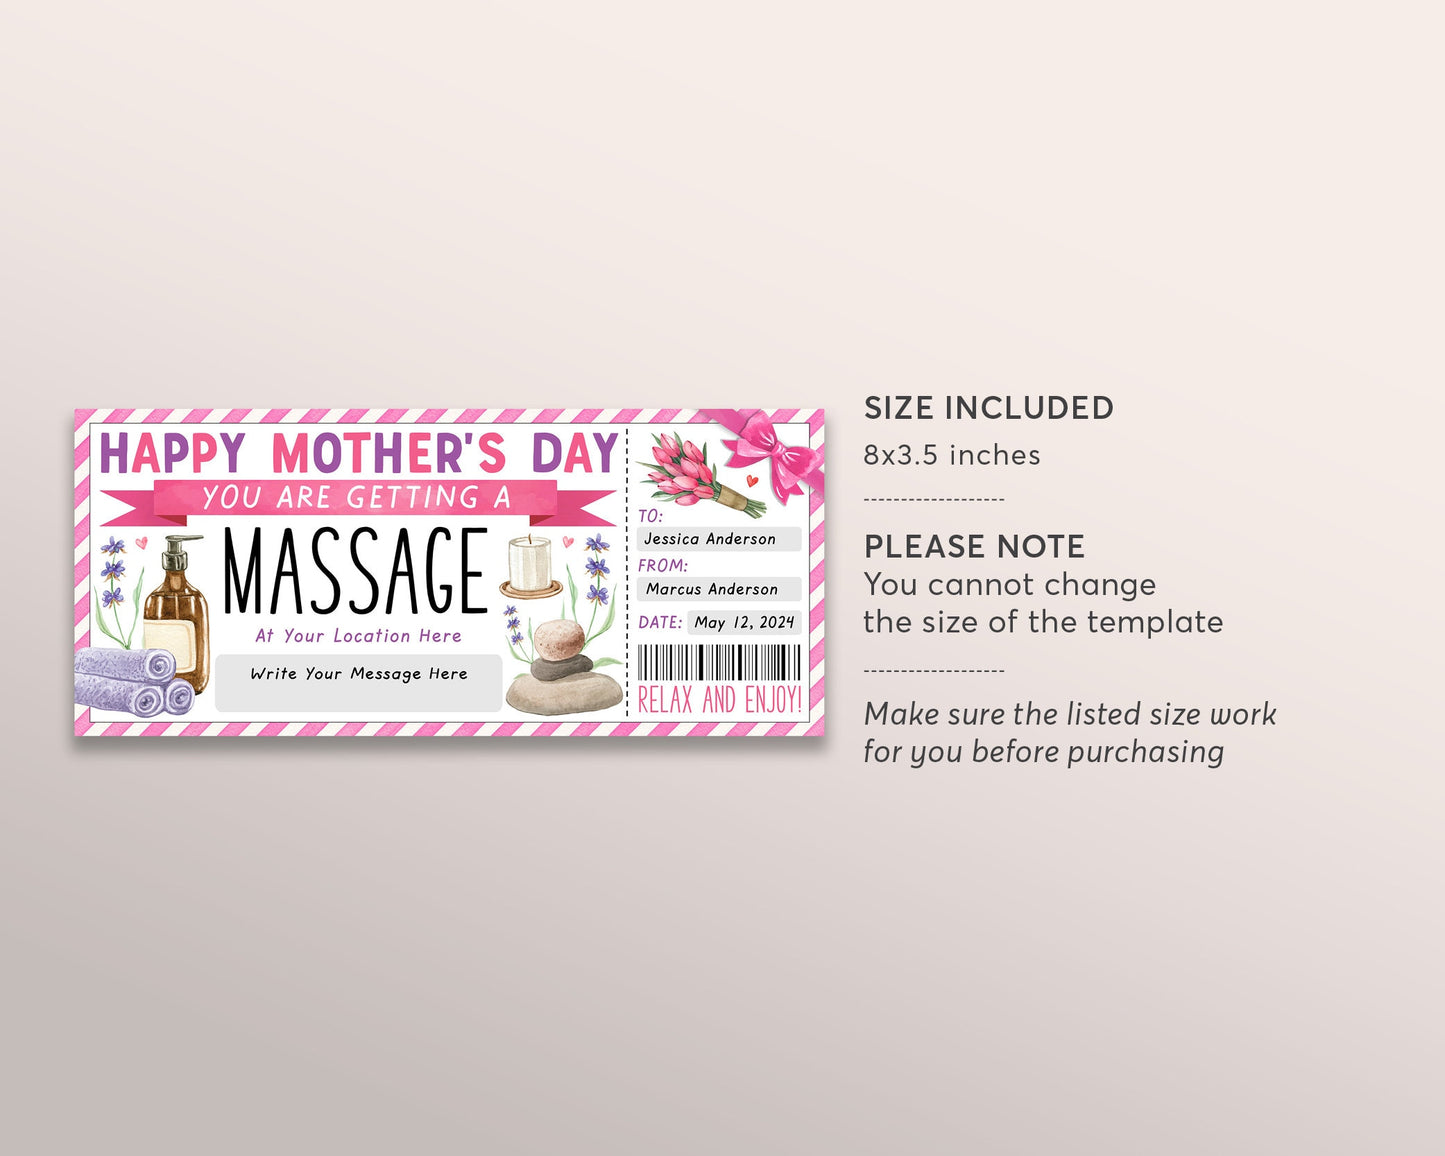 Mothers Day Massage Gift Certificate Ticket Editable Template, Anniversary Surprise Salon Spa Day Treatment Gift Voucher Coupon For Mom